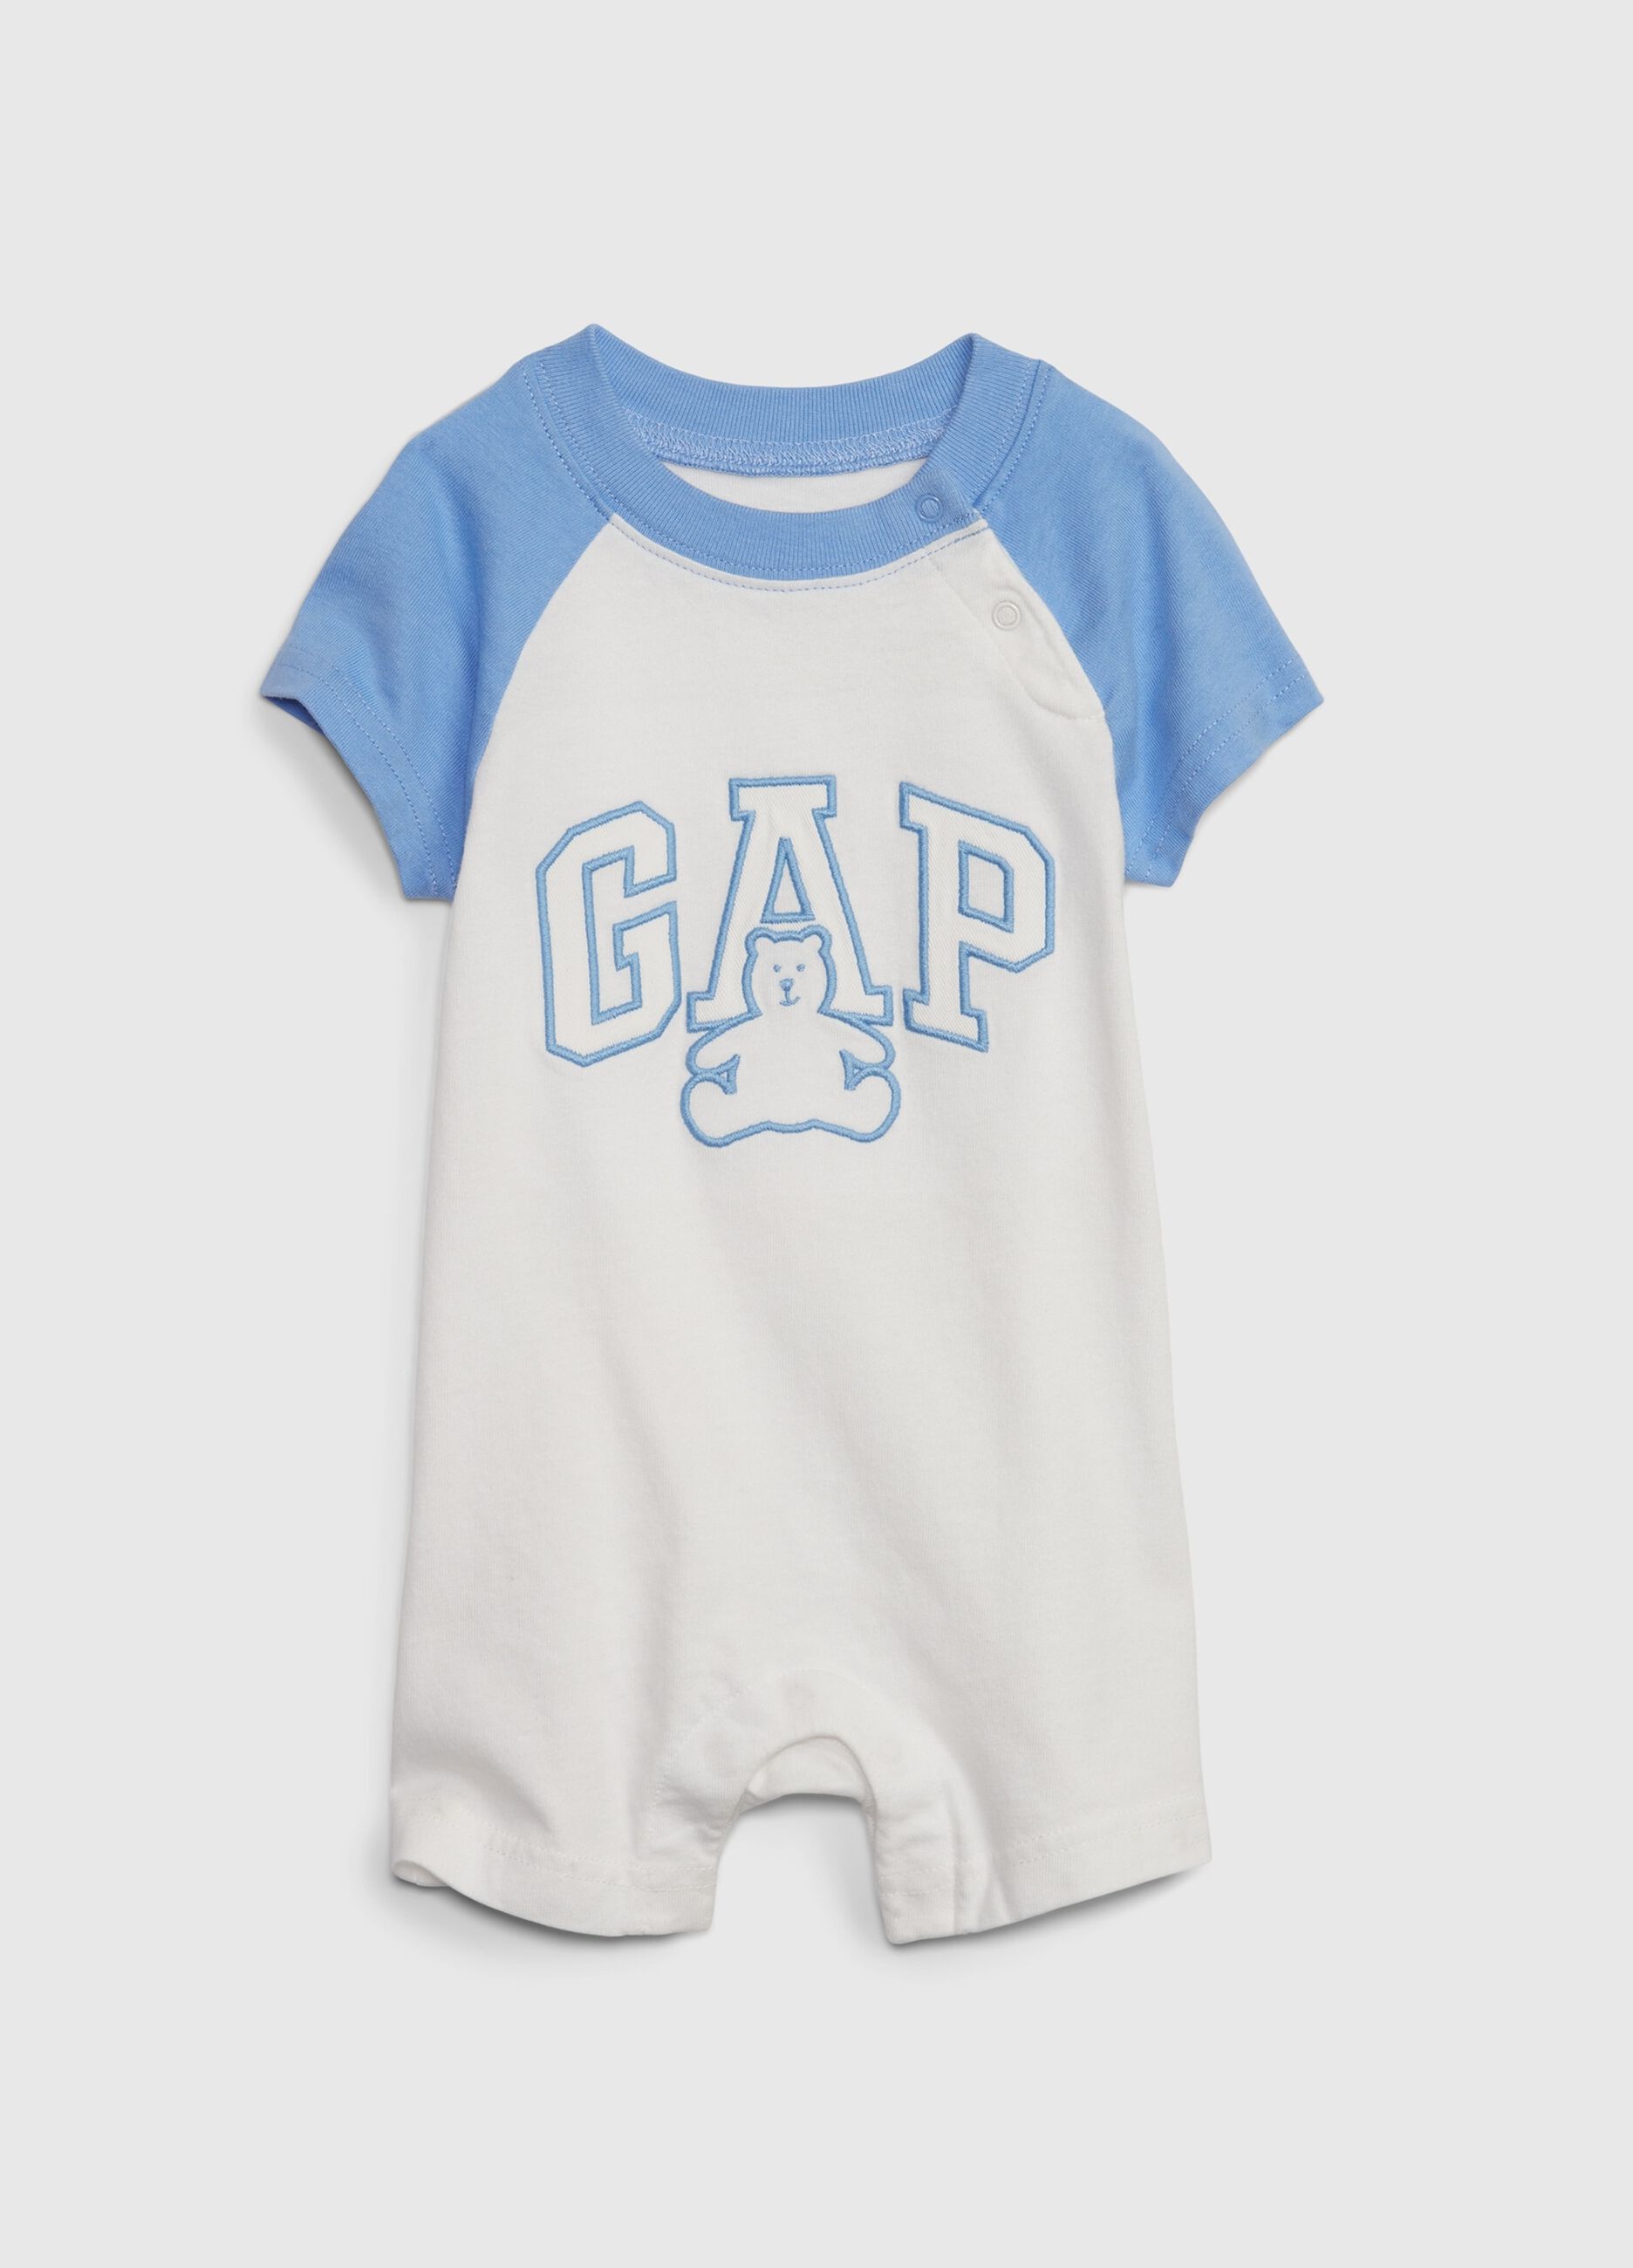 Cotton romper suit with logo and teddy bear print